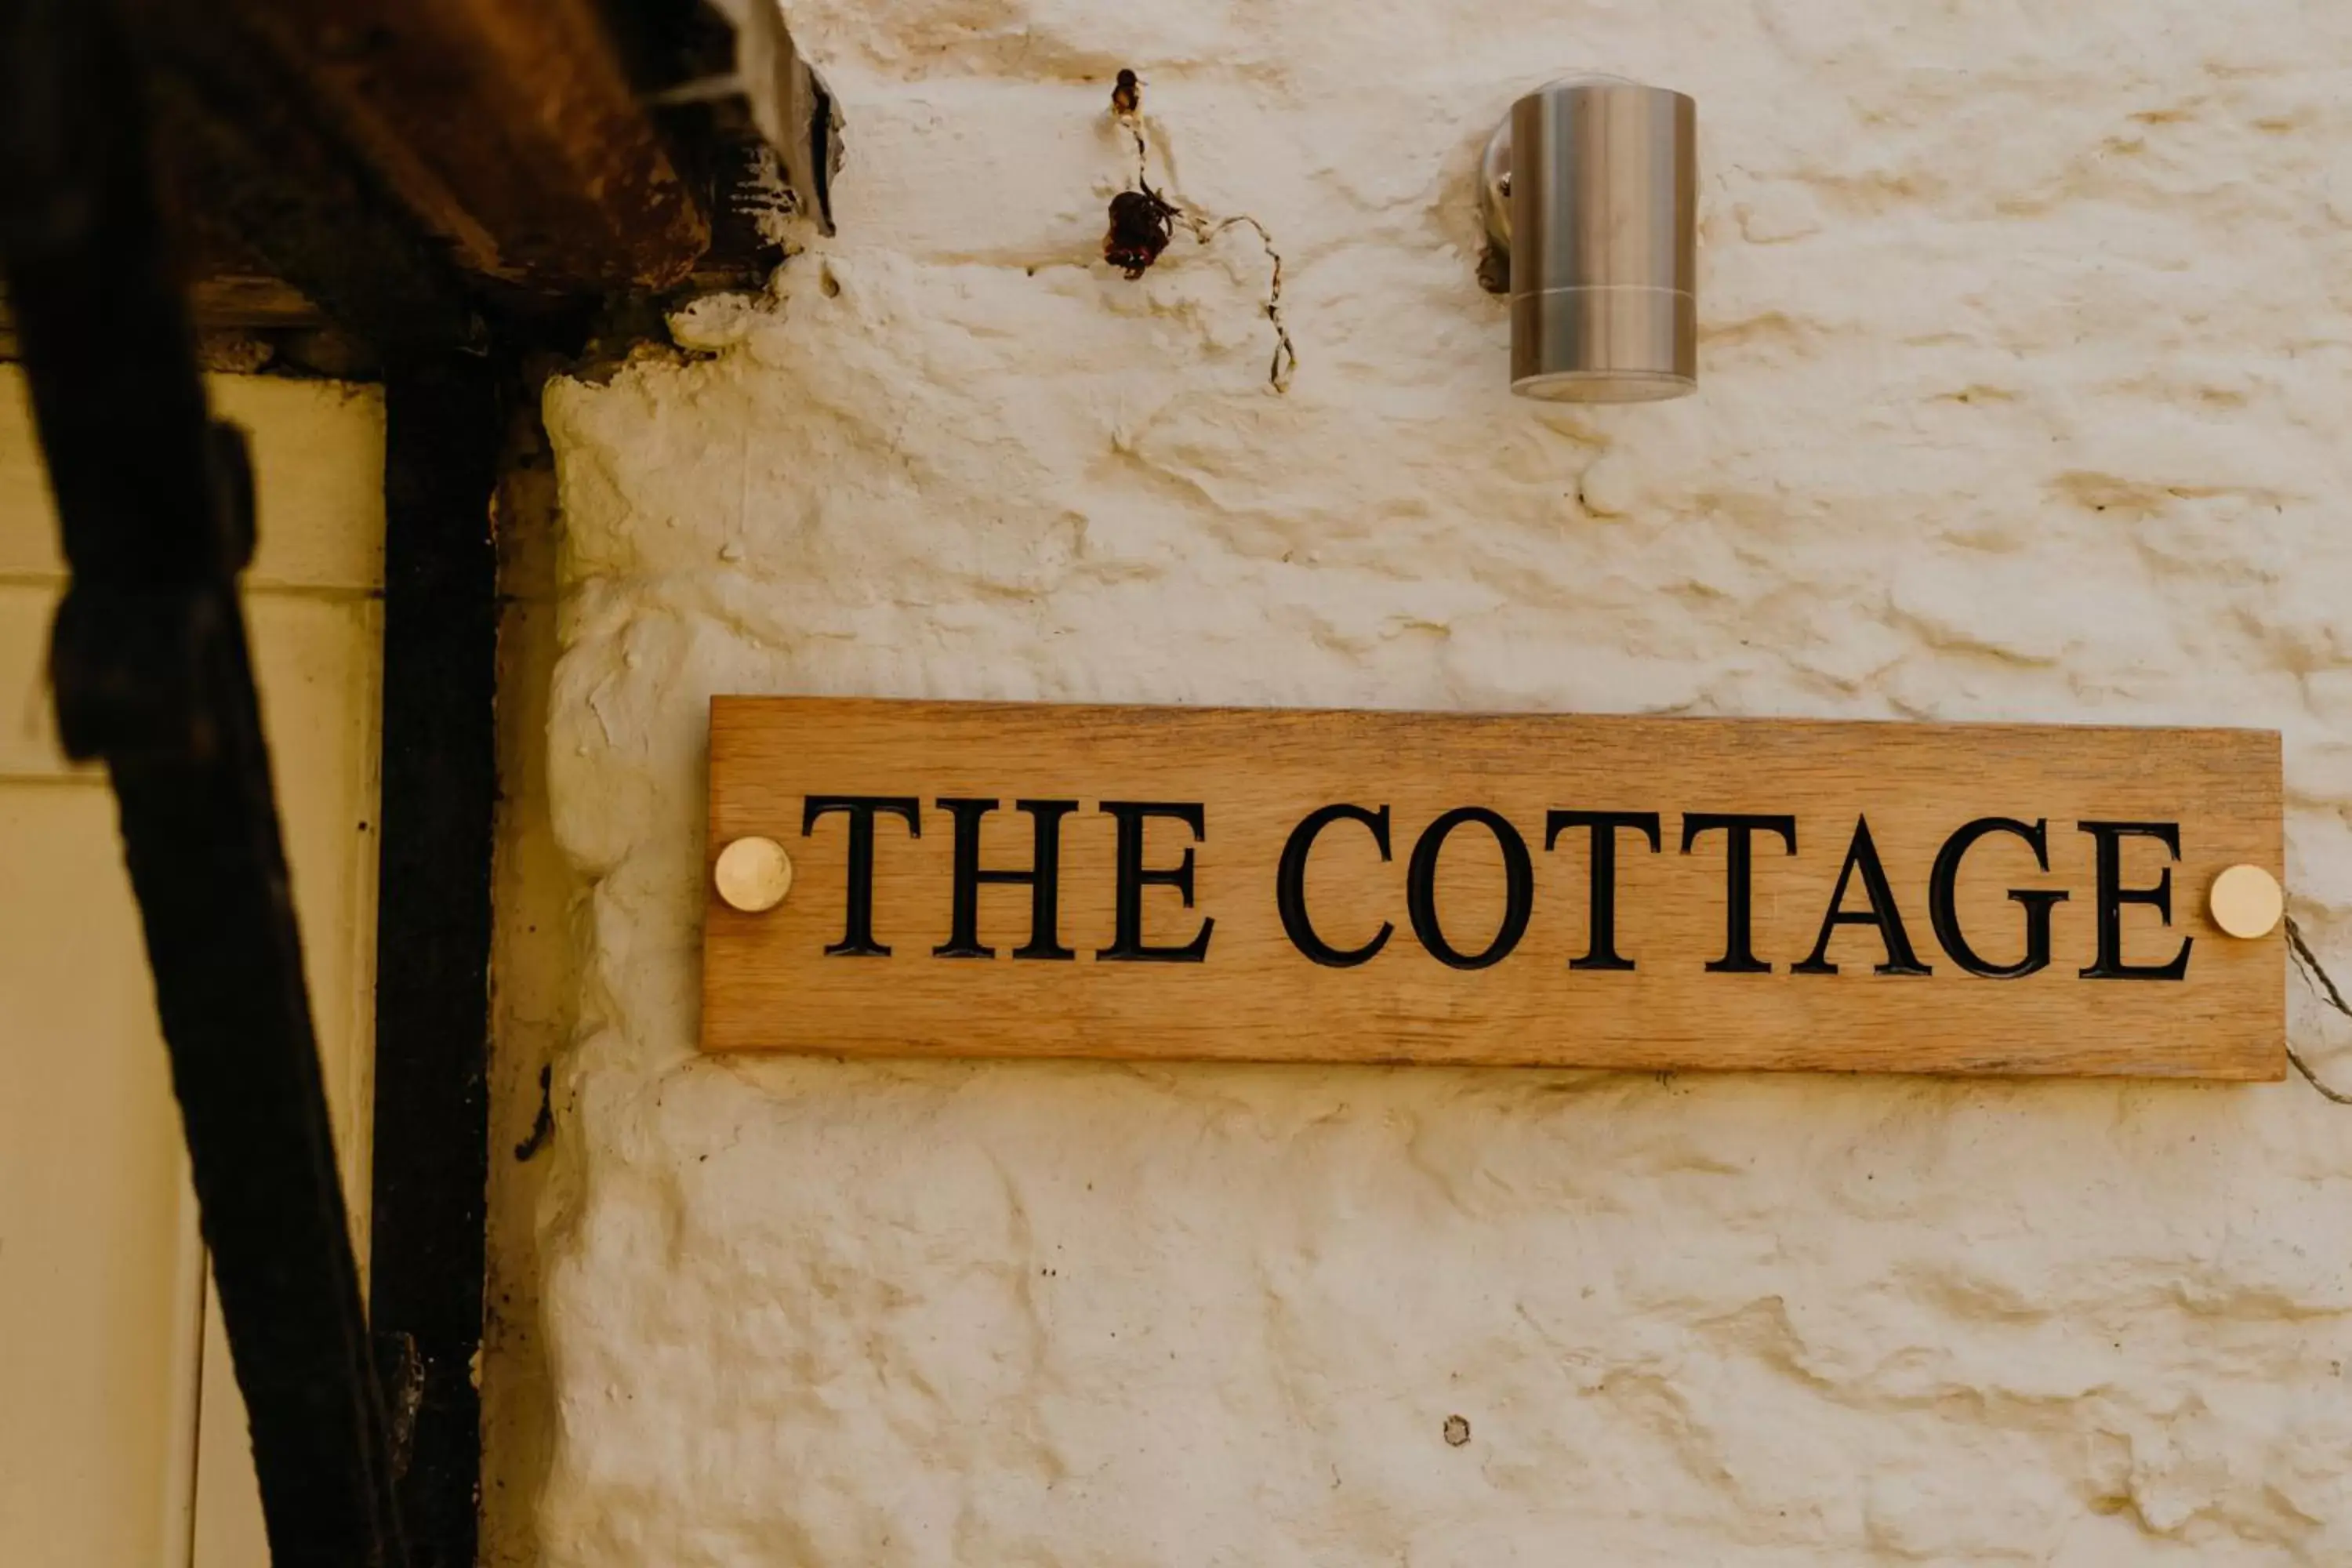 Property logo or sign in Little England Retreats - Cottage, Yurt and Shepherd Huts